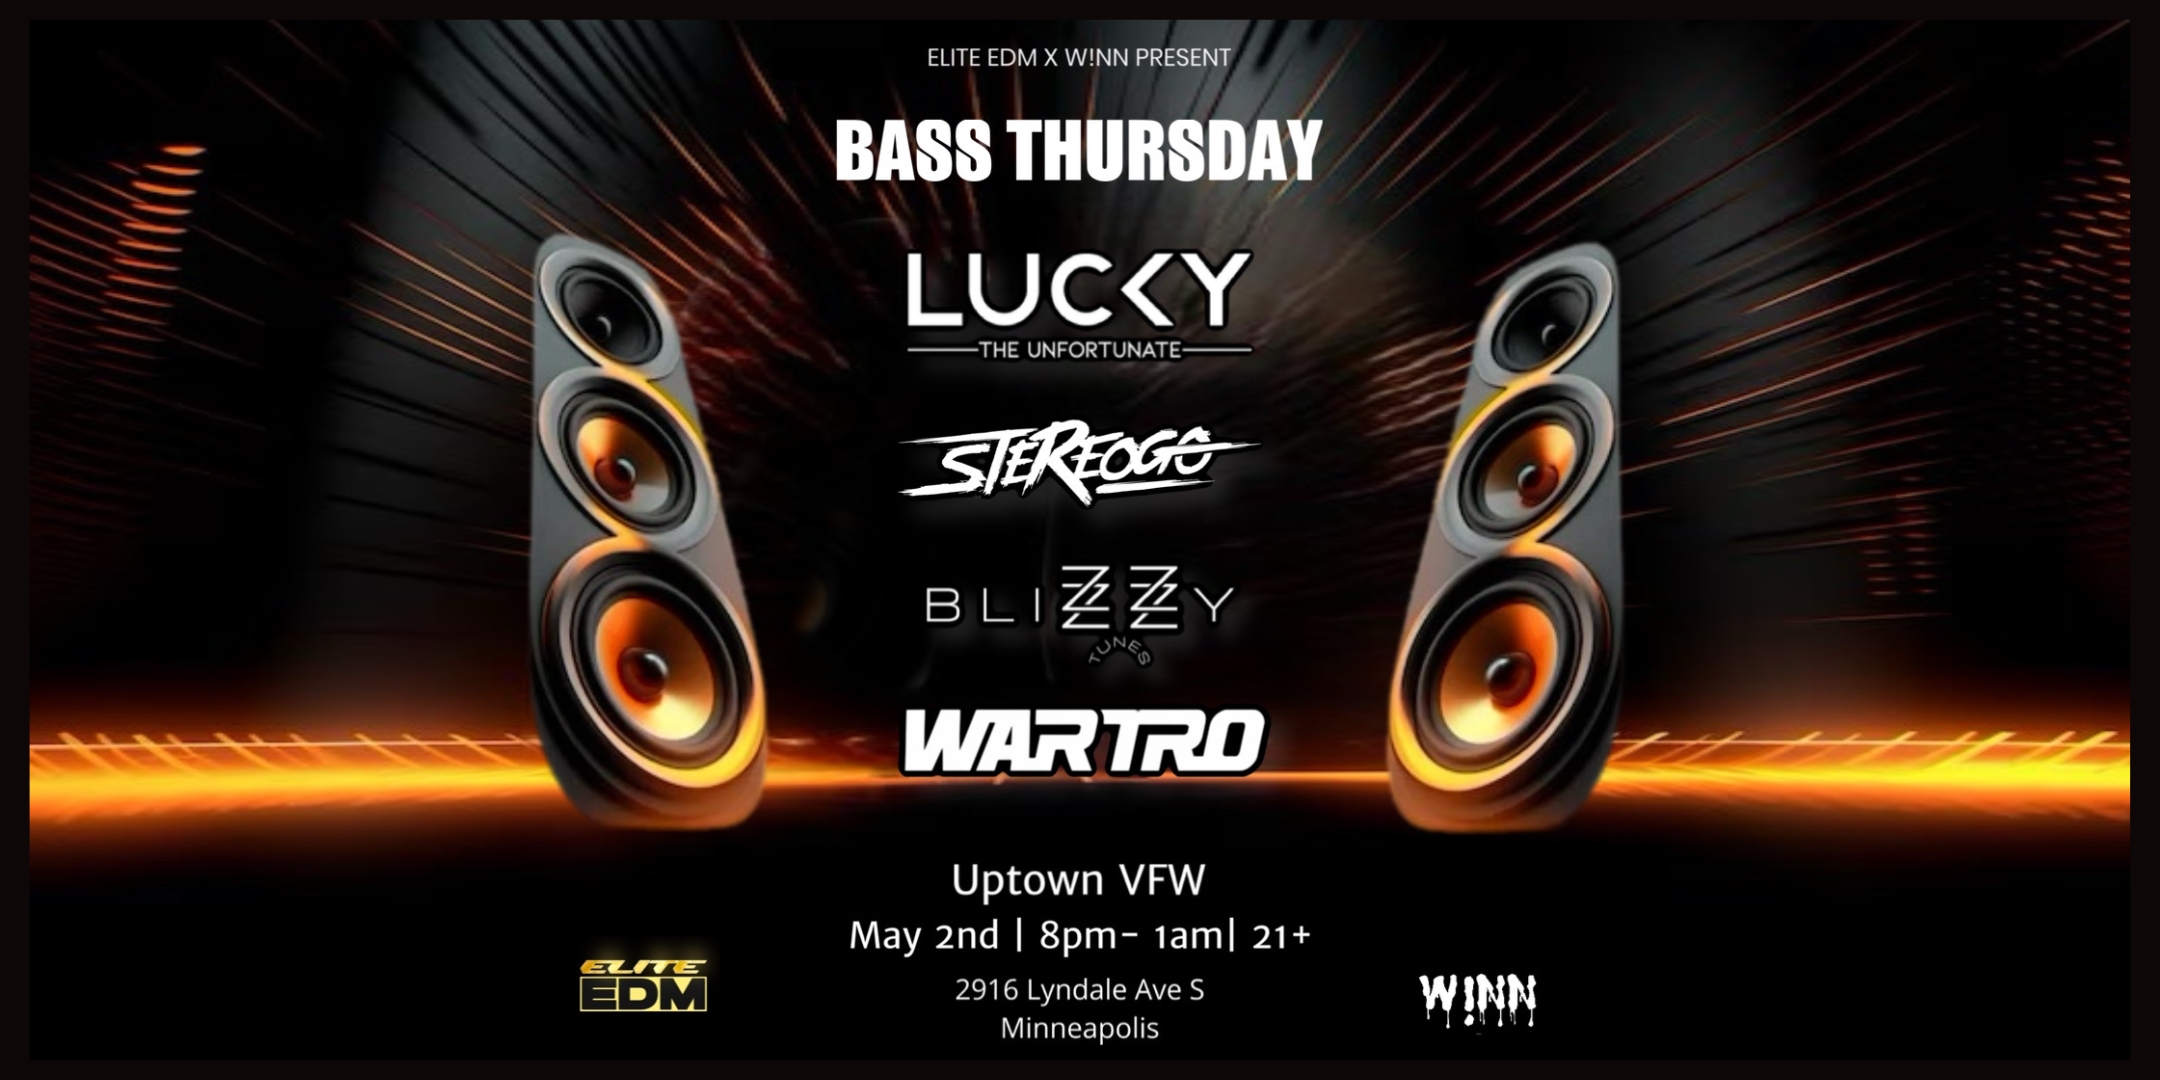 ELITE EDM and W!NN Presents: Lucky The Unfortunate | Stereogo | Wartro | Blizzy Tunes Thursday May 2 James Ballentine “Uptown” VFW Post 246 Doors 8:00pm :: Music 8pm-1am :: 21+ GA $5 ADV / $10 DOS Tickets On Sale Now